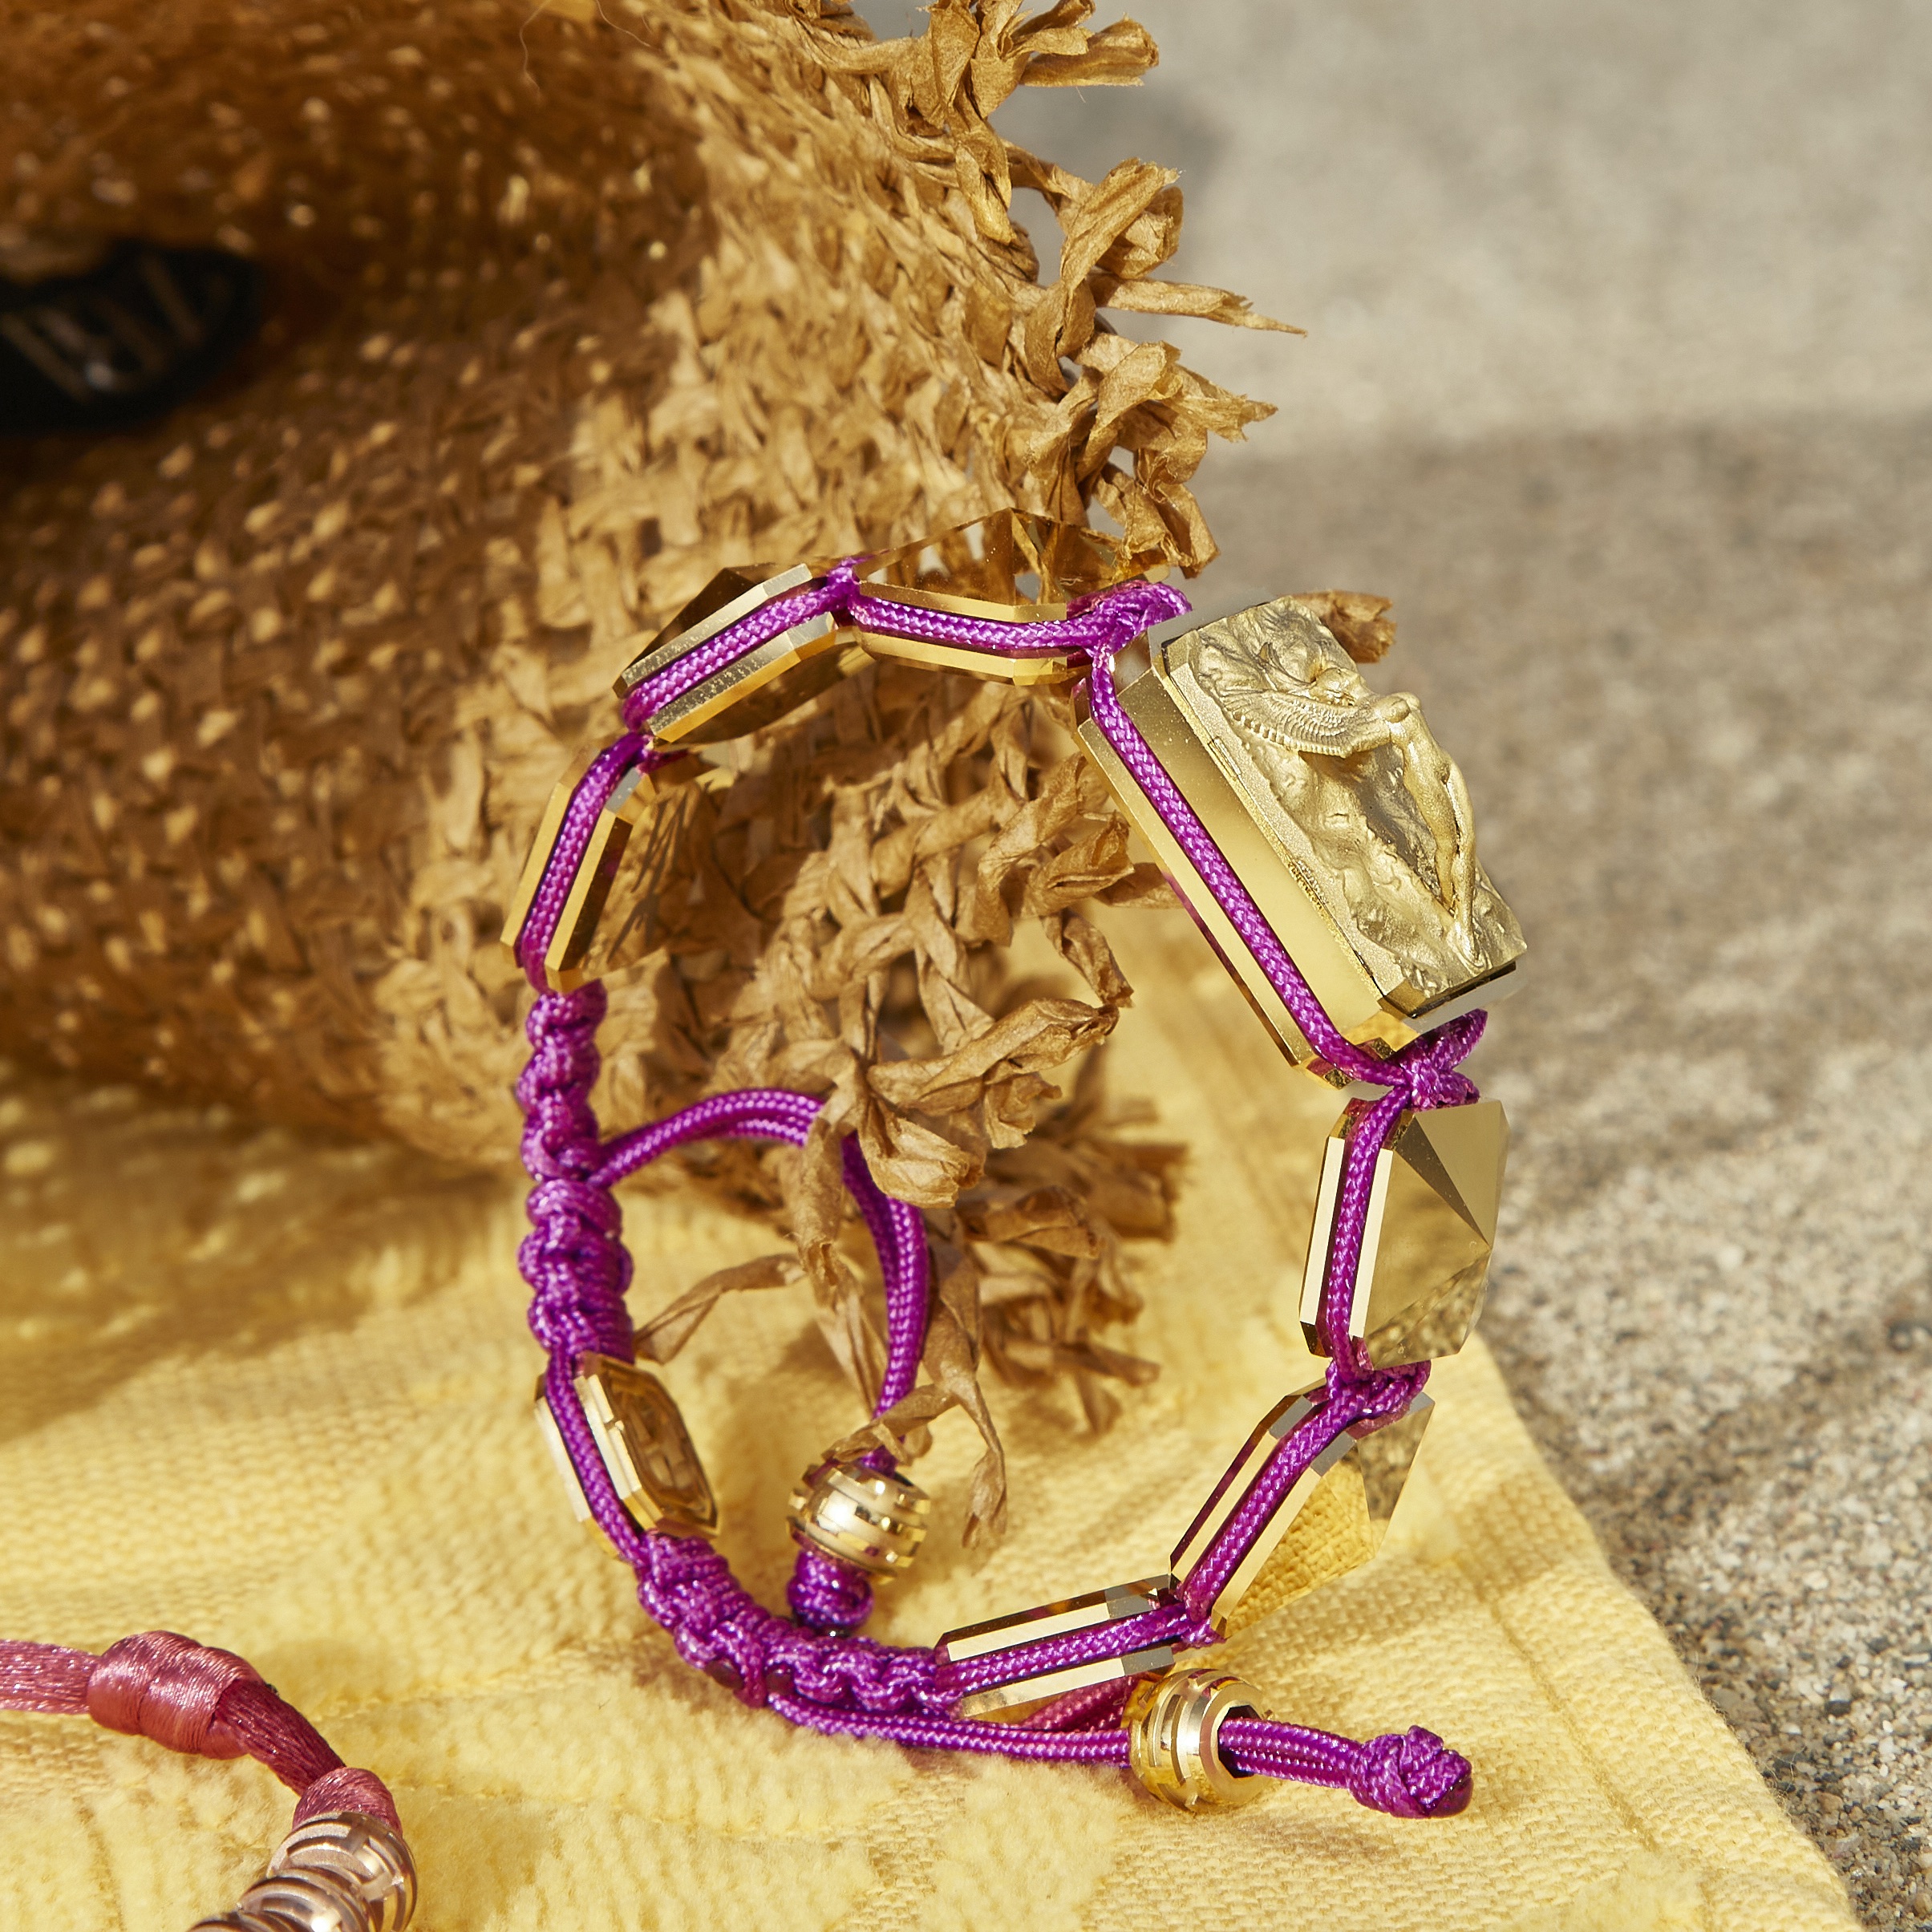 Miss You bracelet with ceramic and sculpture finished in 18k Yellow Gold complemented with a violet coloured cord.